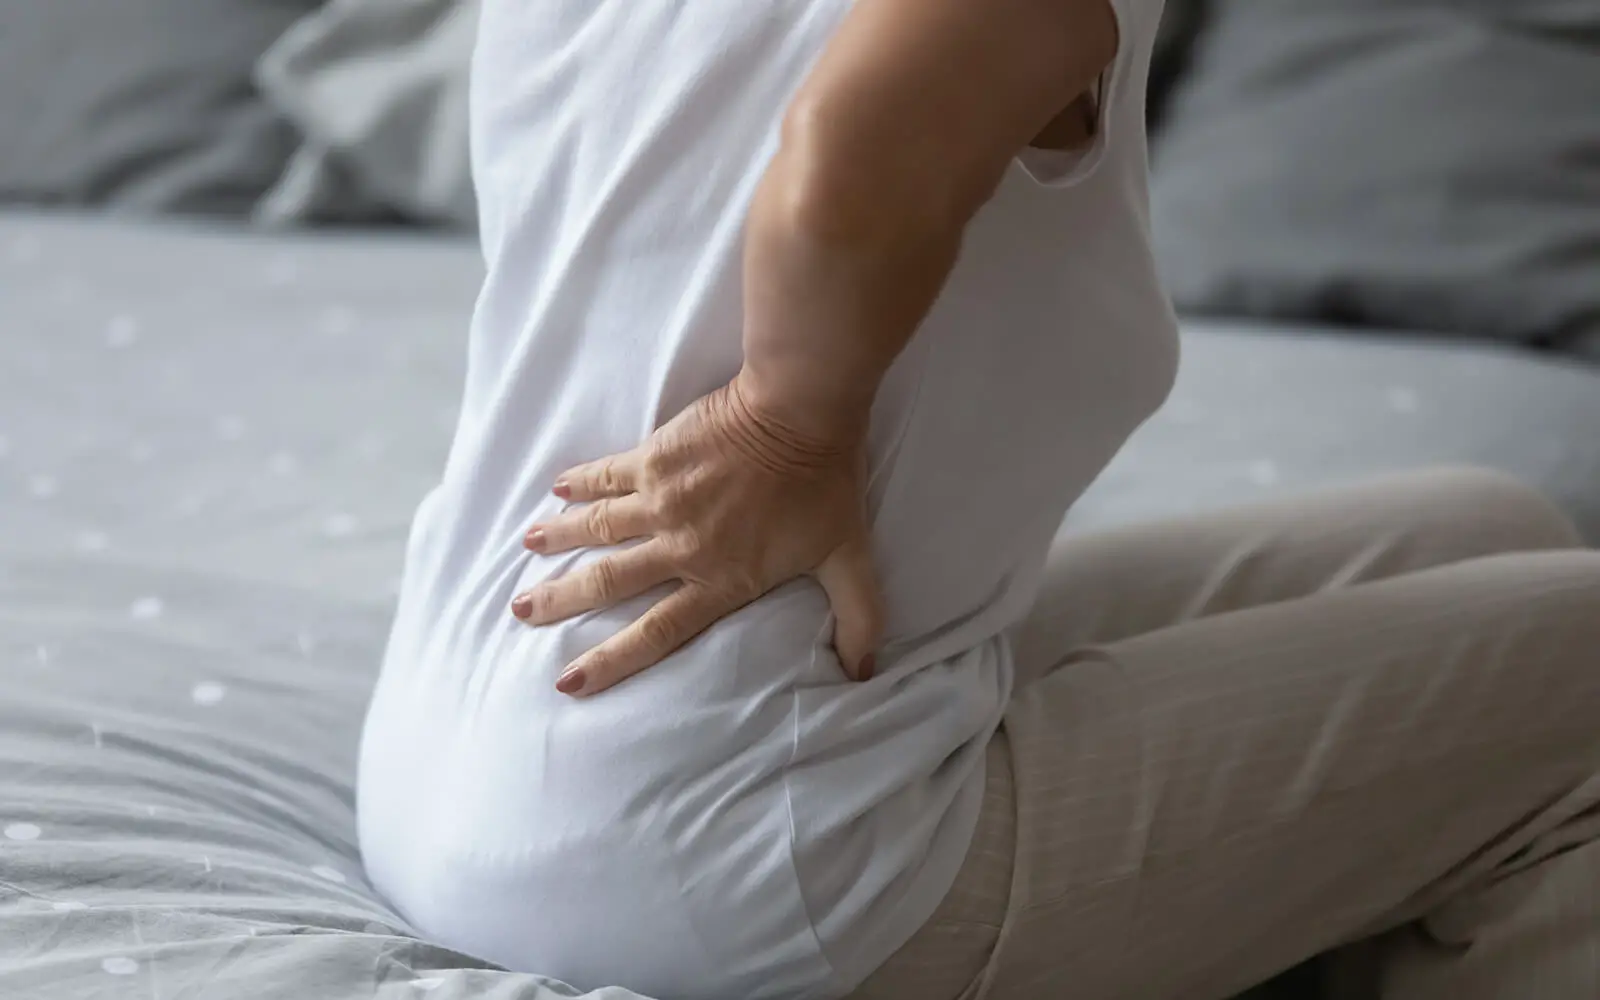 Why Does My Back Hurt? Understanding Obesity, Back Pain ...